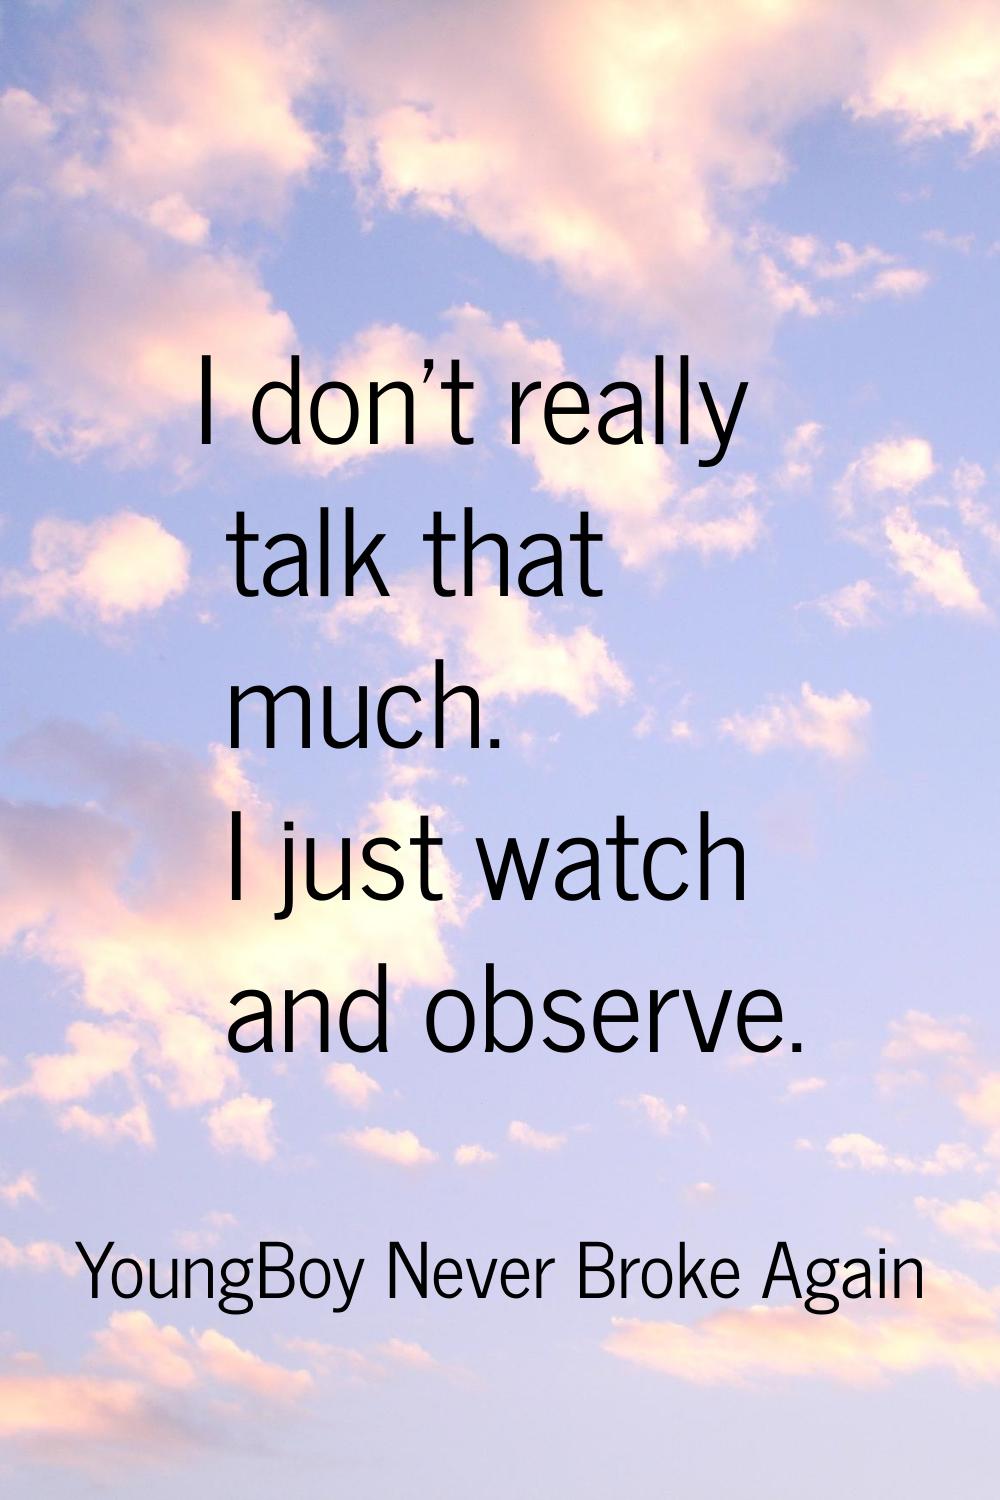 I don't really talk that much. I just watch and observe.